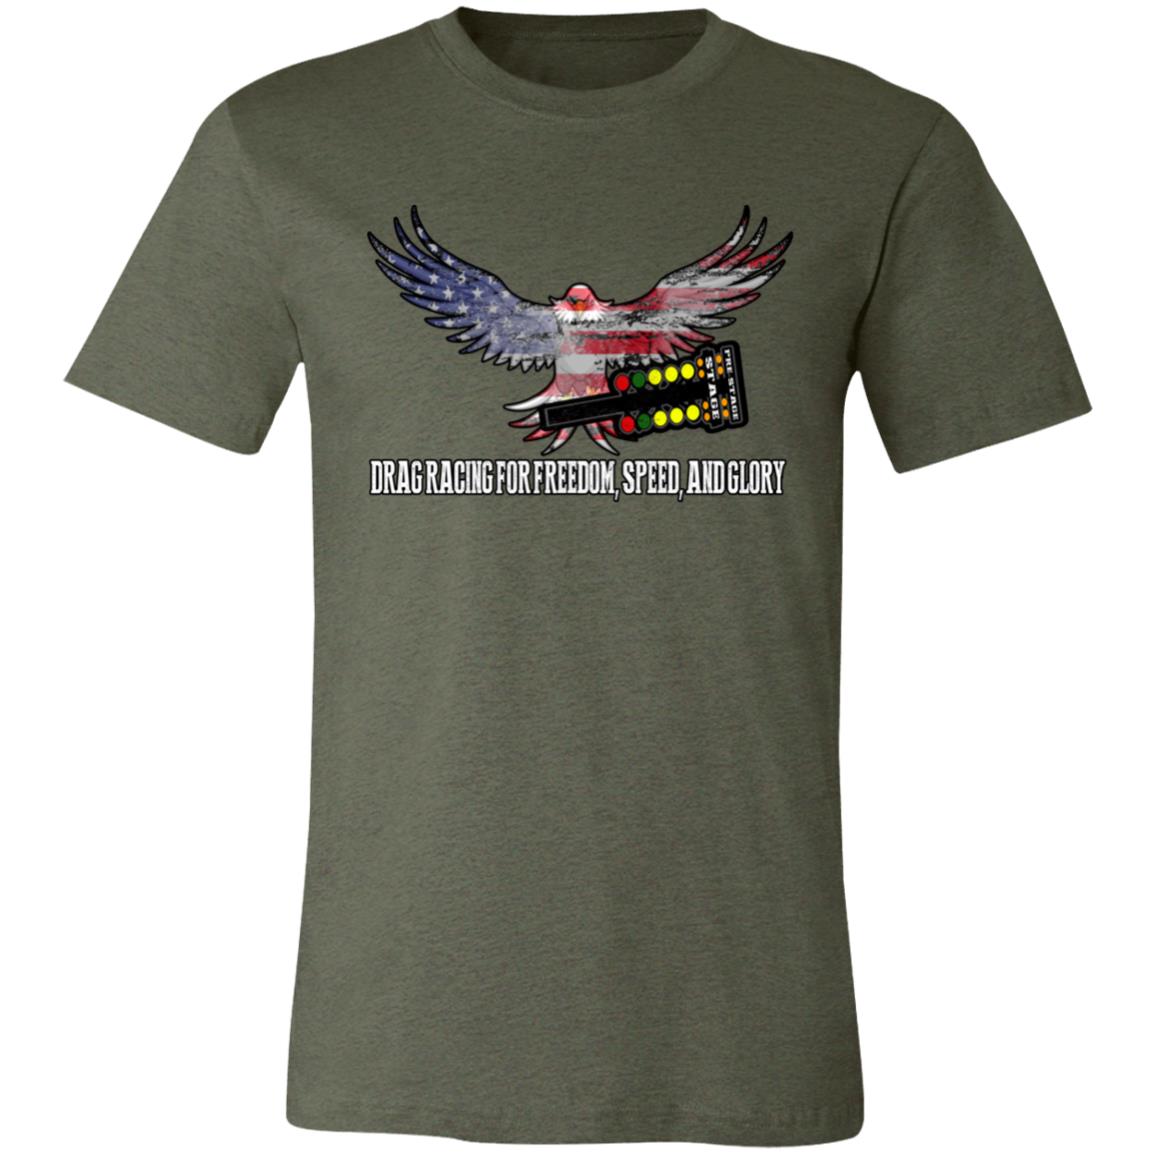 Drag Racing for Freedom, Speed, and Glory Unisex Jersey Short-Sleeve T-Shirt